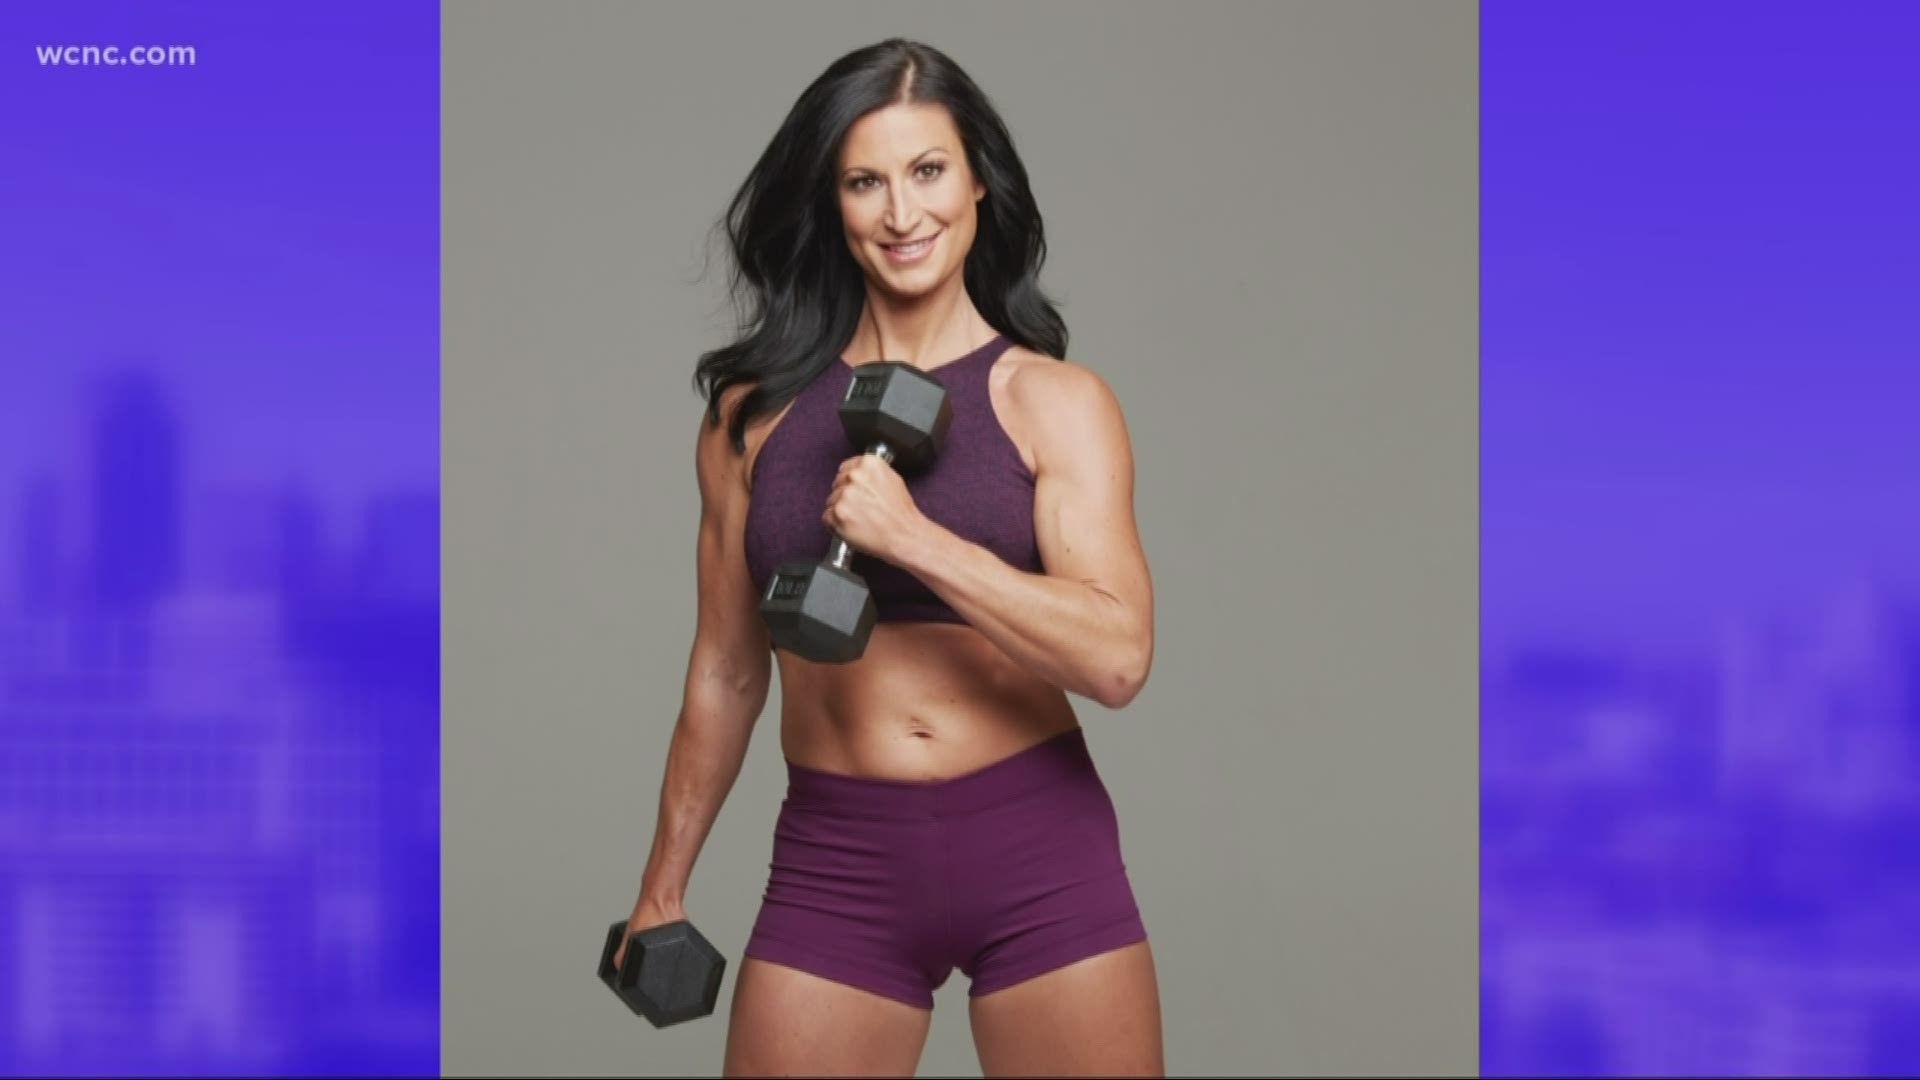 Janet Selz won a 90 day fitness and nutrition challenge to get a spot on the cover.